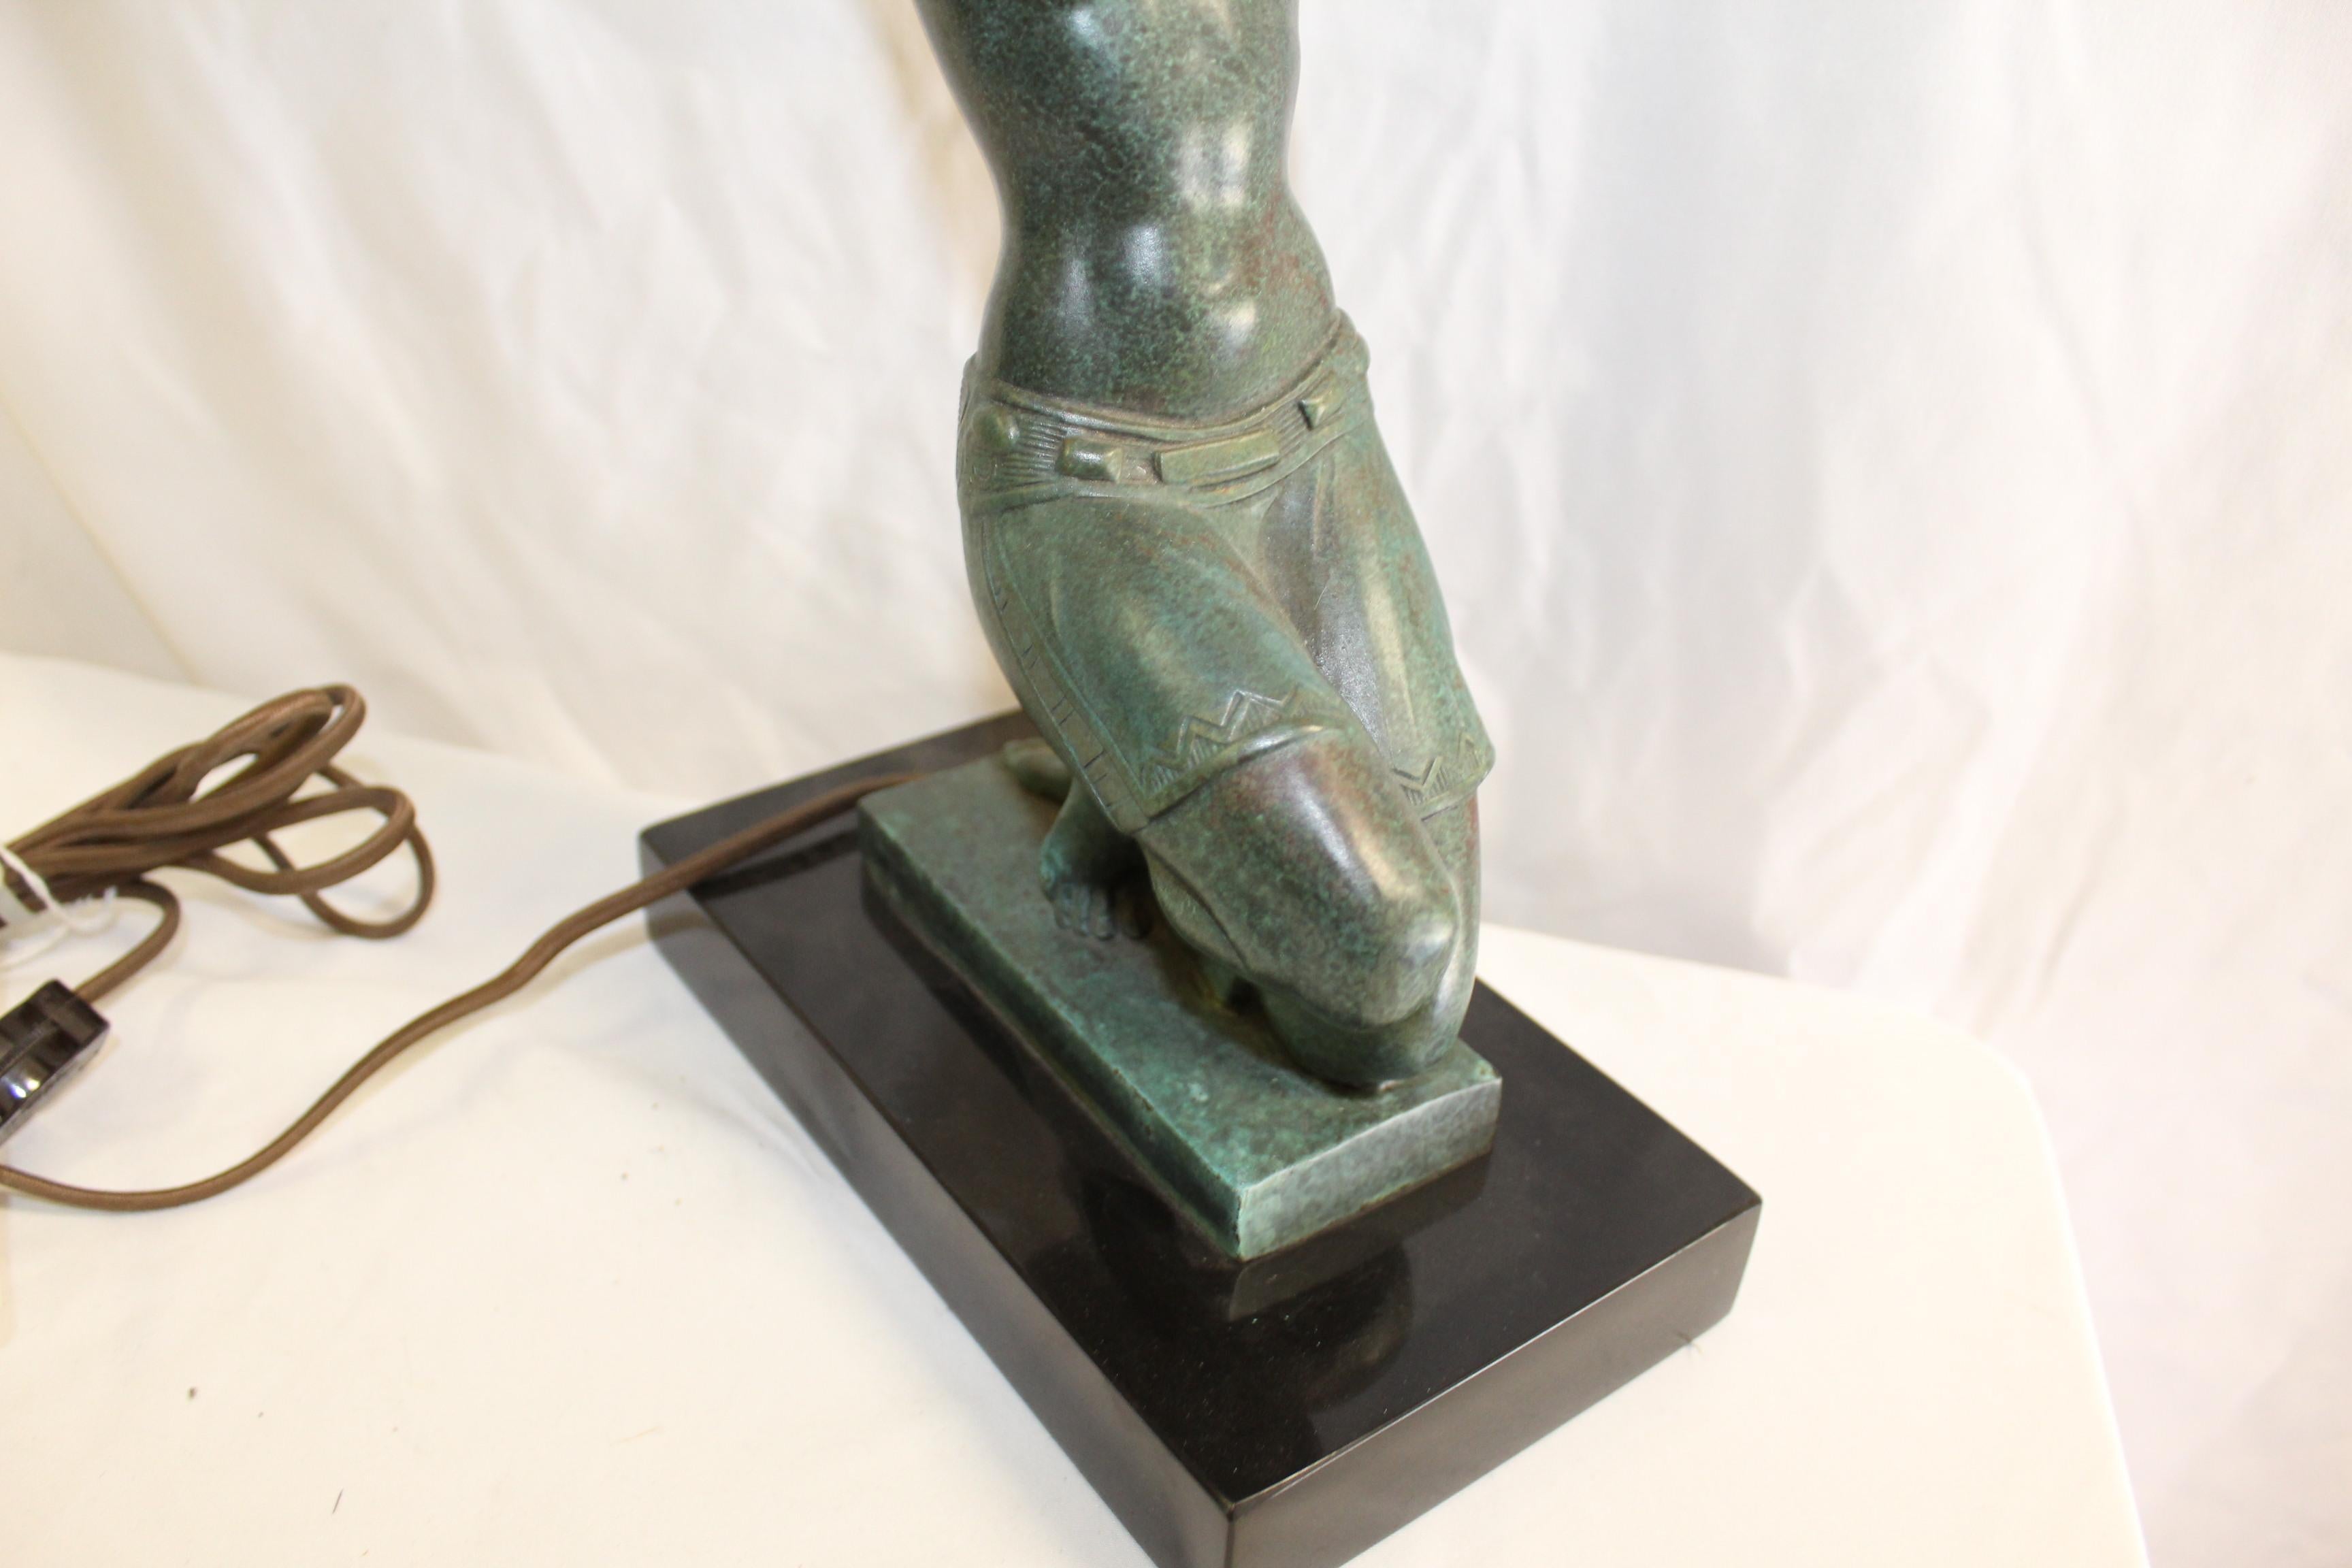 Deco girl lamp cast in Bronze with a green patina mounted on an absolute black marble base 8 1/4